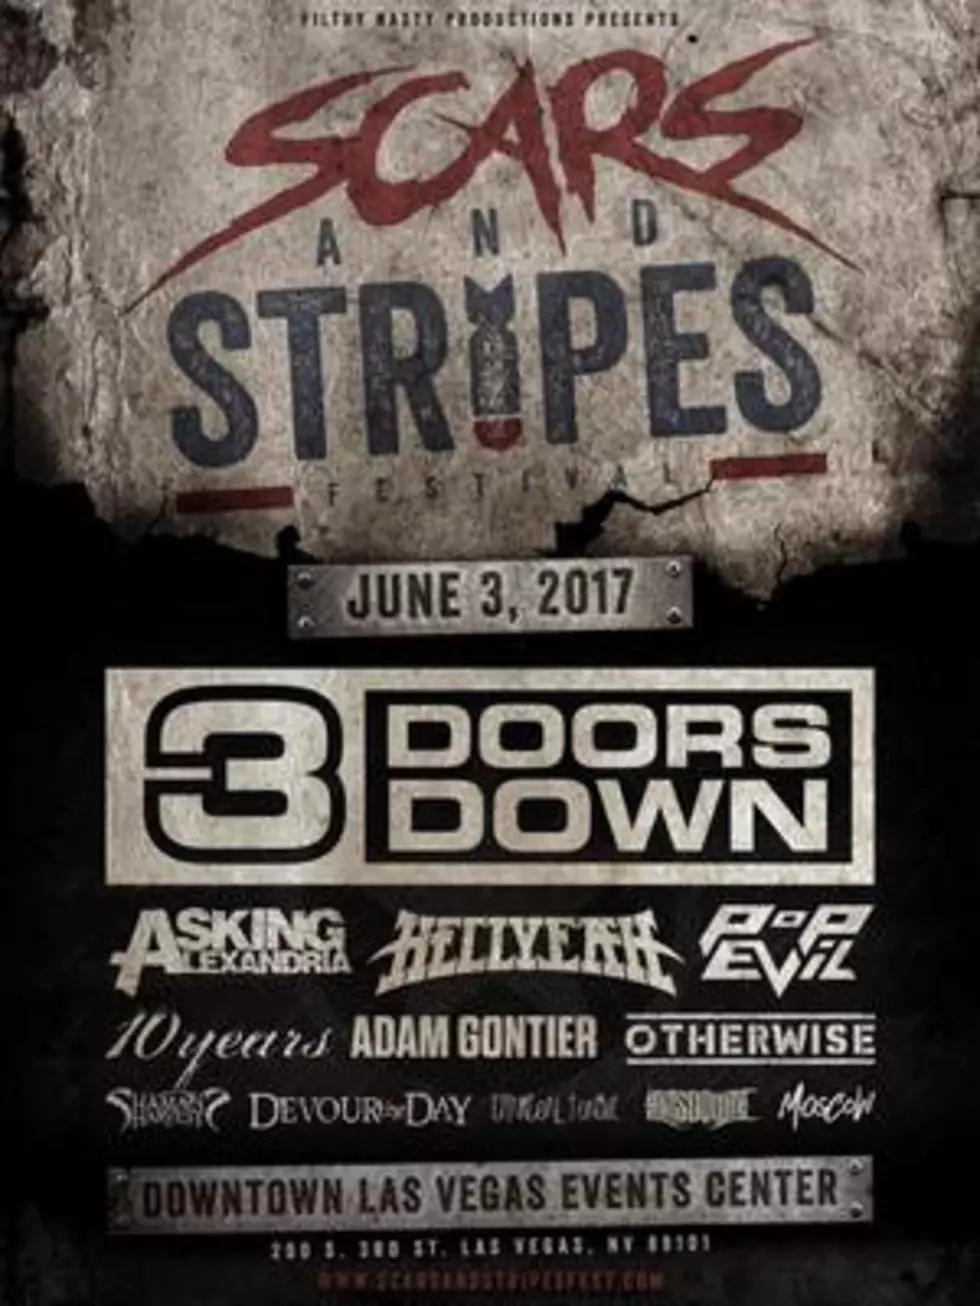 Inaugural Scars and Stripes Festival to Feature 3 Doors Down, Asking Alexandria, Pop Evil + More